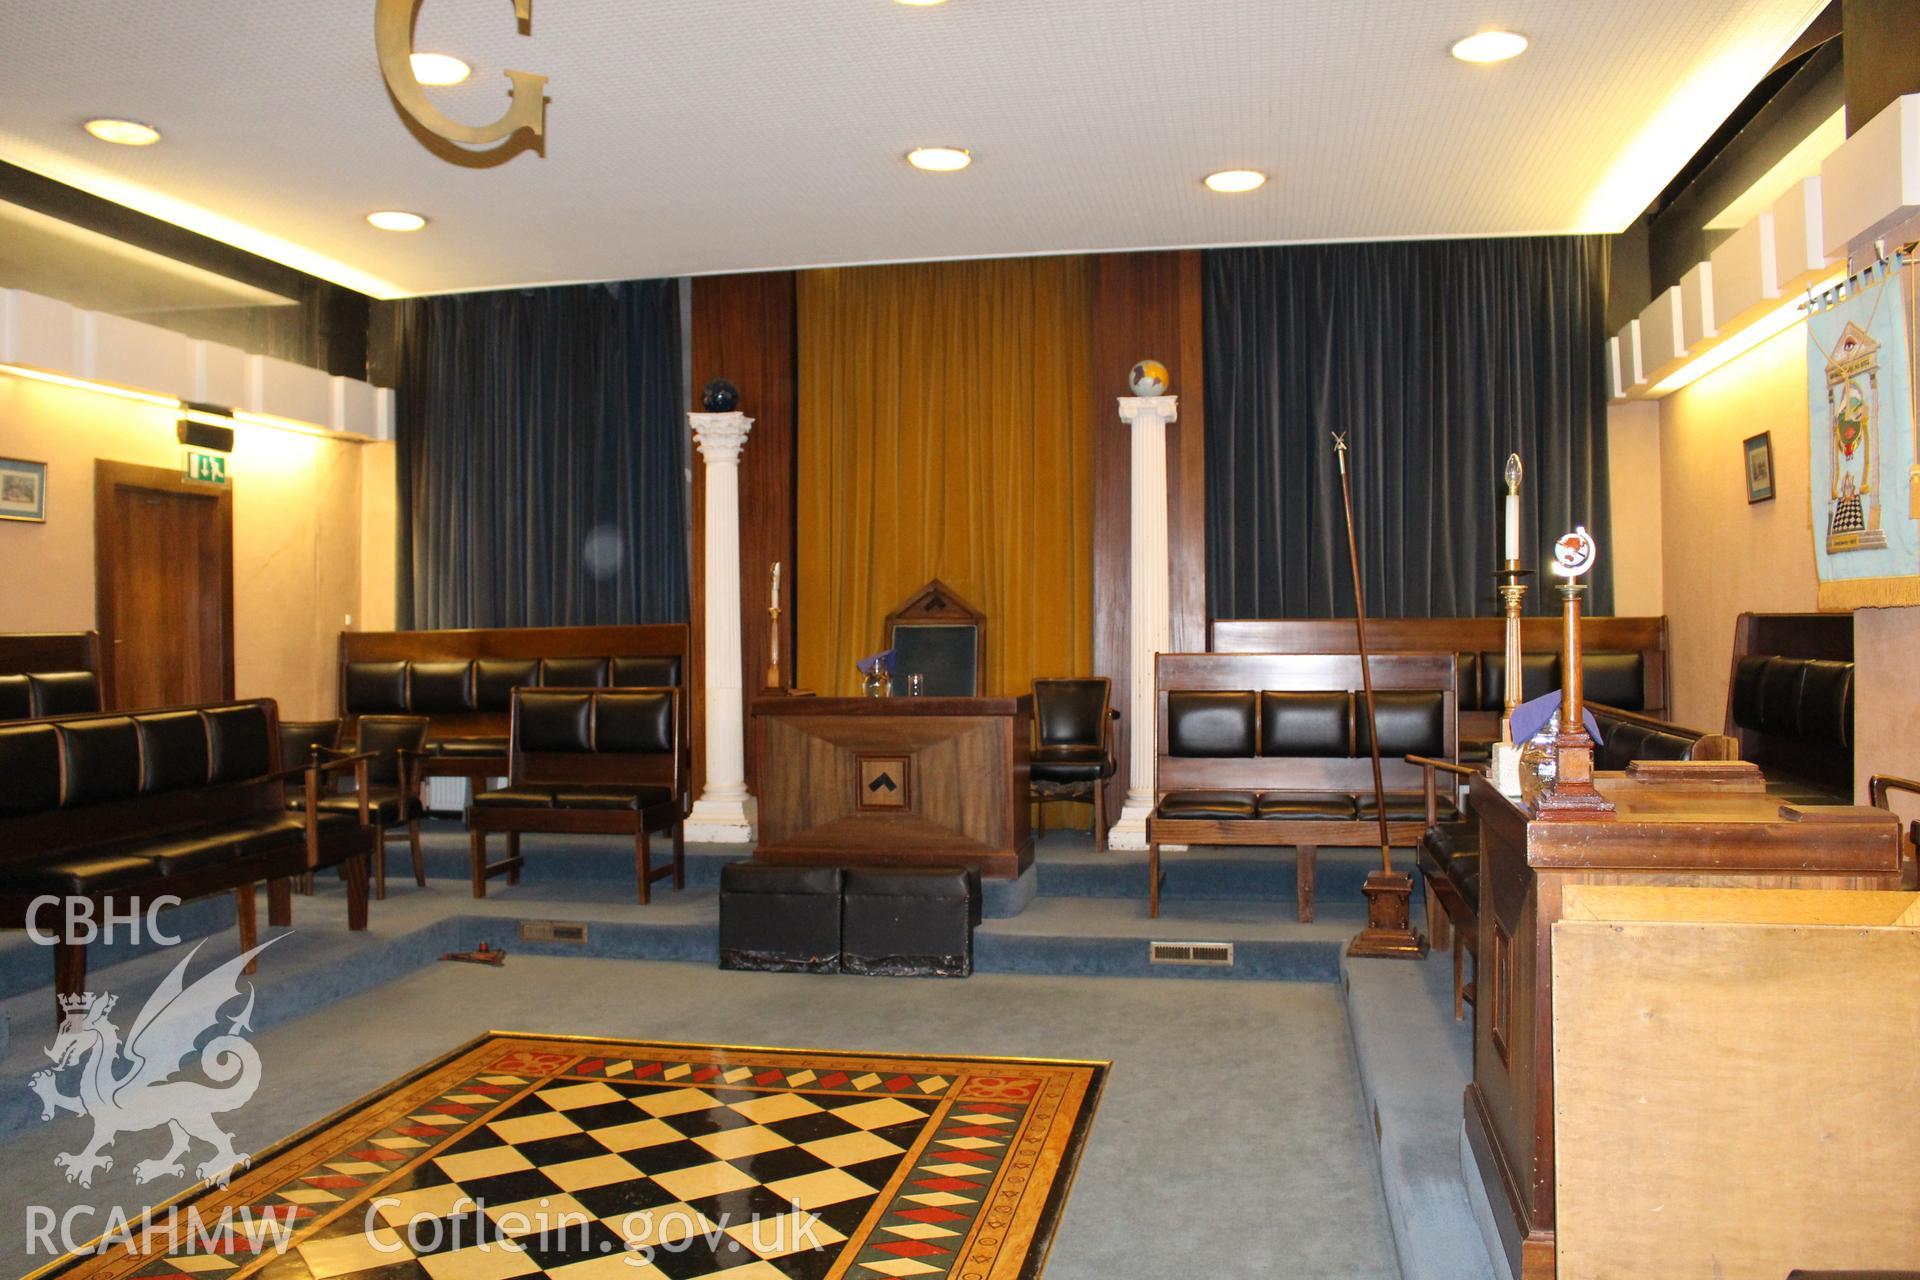 Interior view of former United Free Methodist Church, now a Masonic Temple, in Cardiff. Photograph taken during survey conducted by Sue Fielding of the RCAHMW, 11th March 2019.